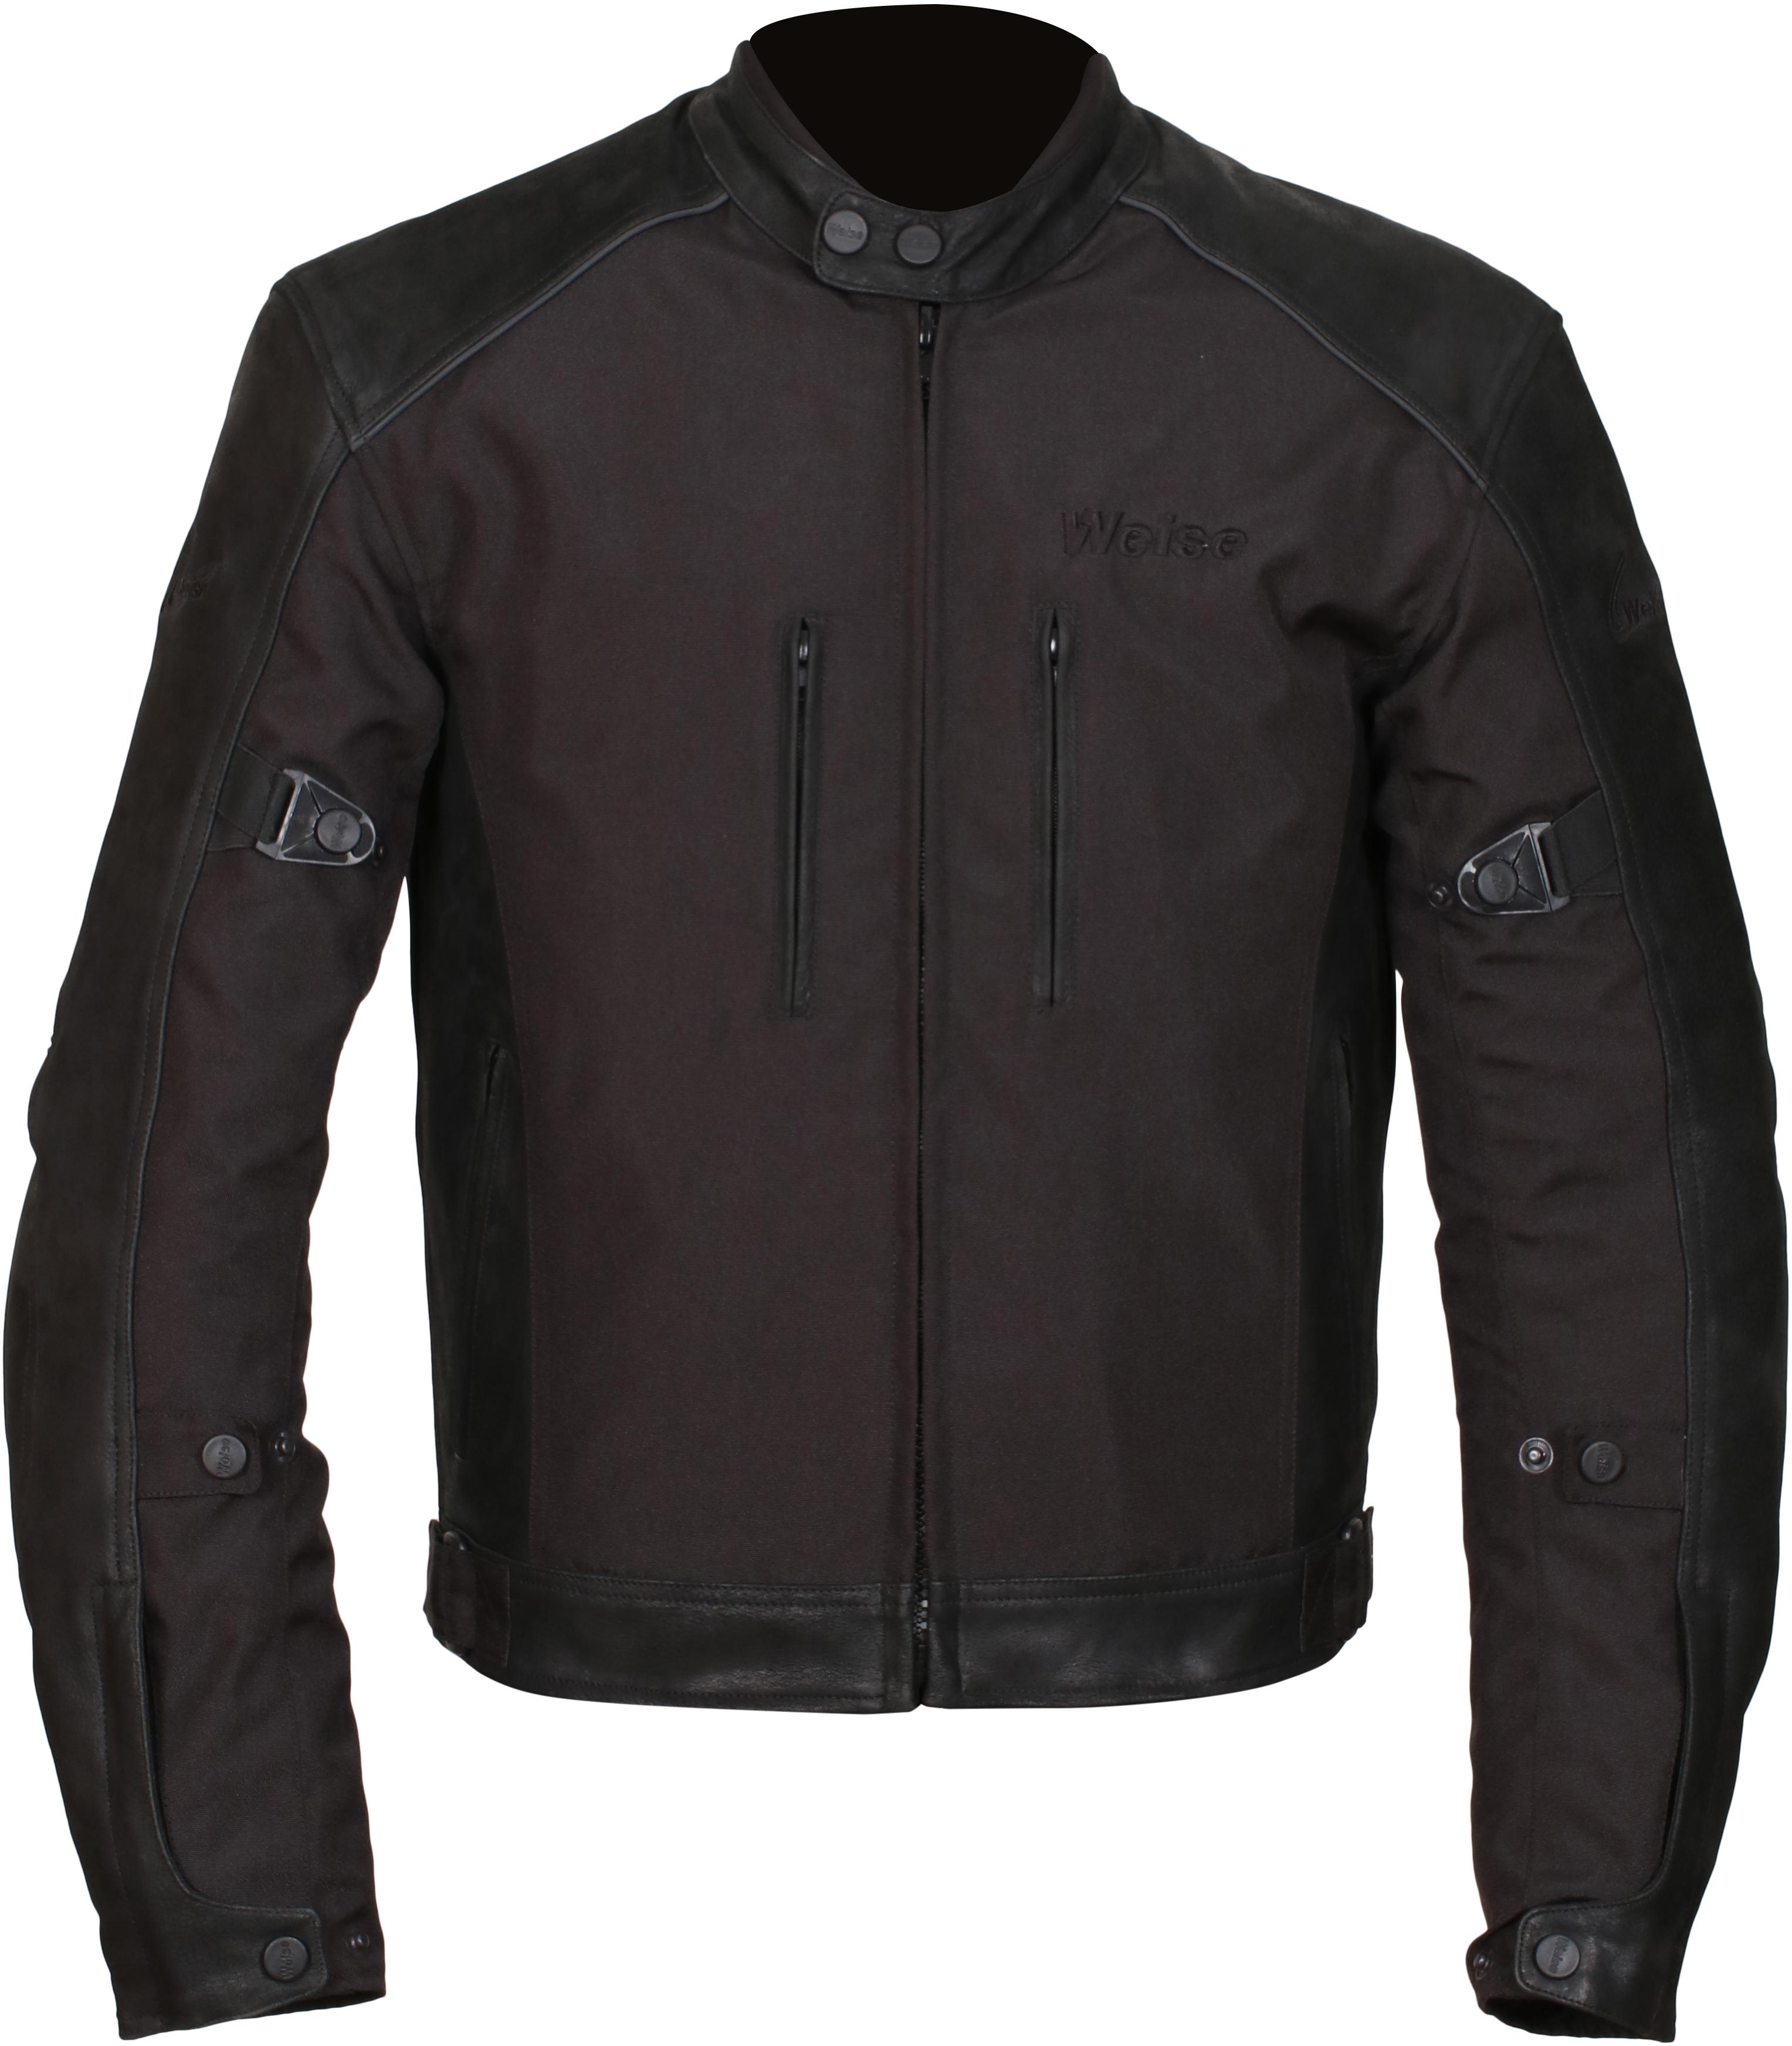 Weise Mission Motorcycle Jacket - Black, S